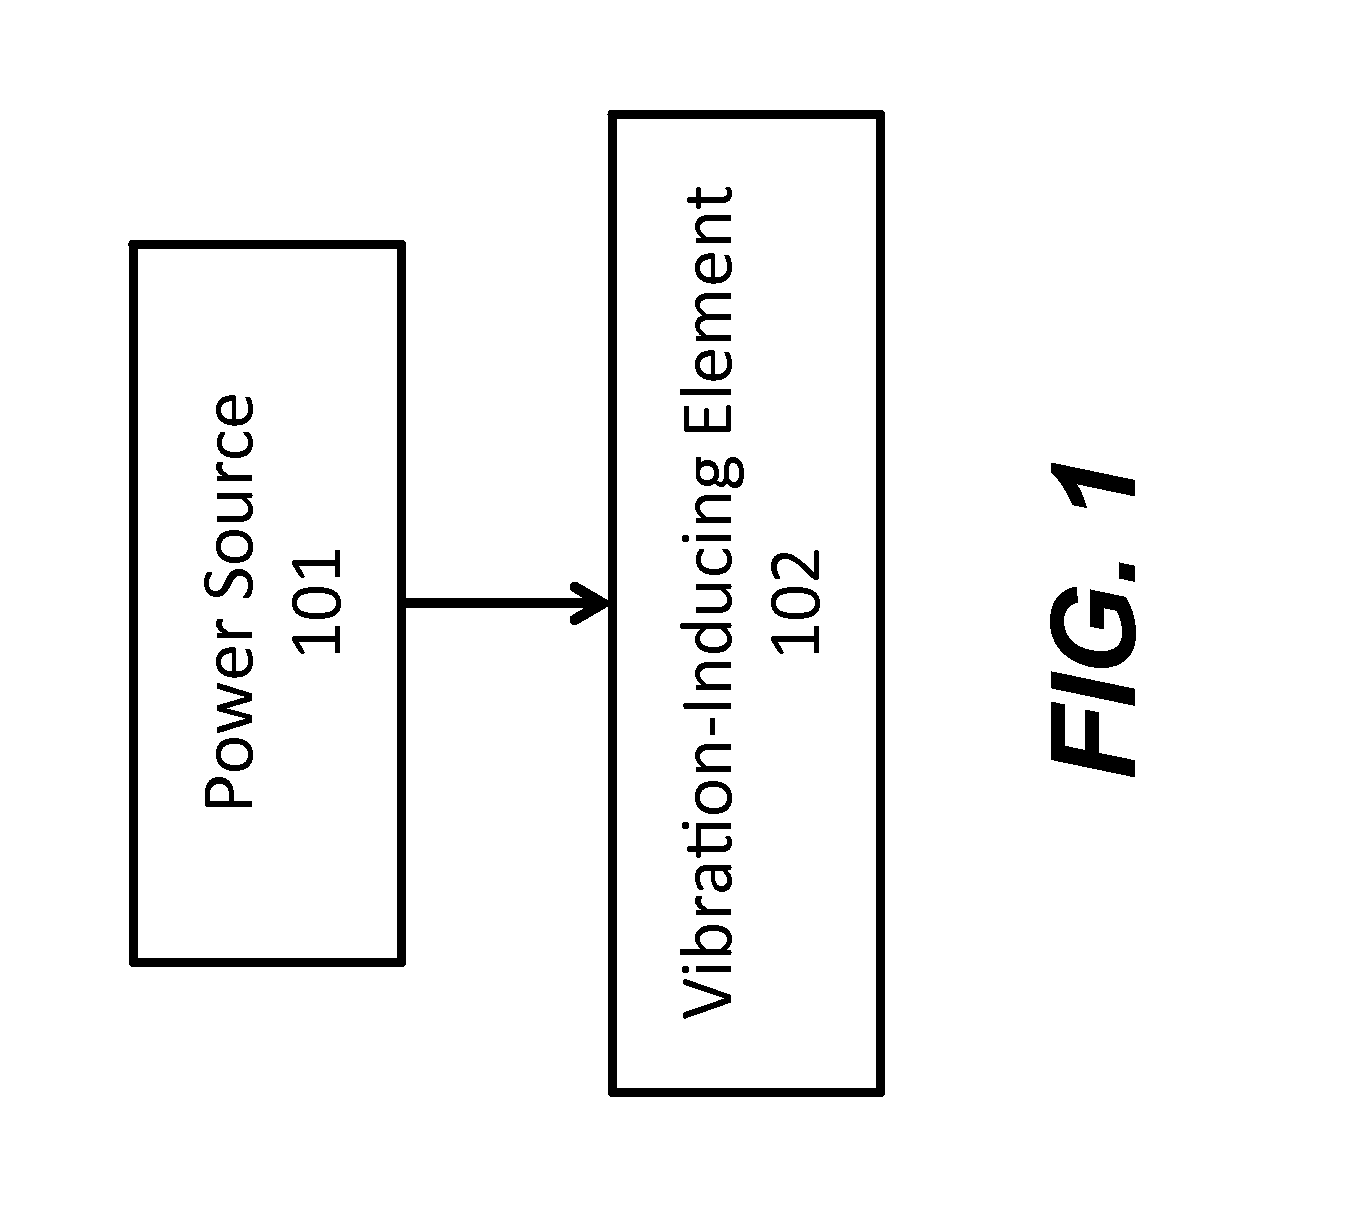 Device for Mitigating Motion Sickness and Other Responses to Inconsistent Sensory Information